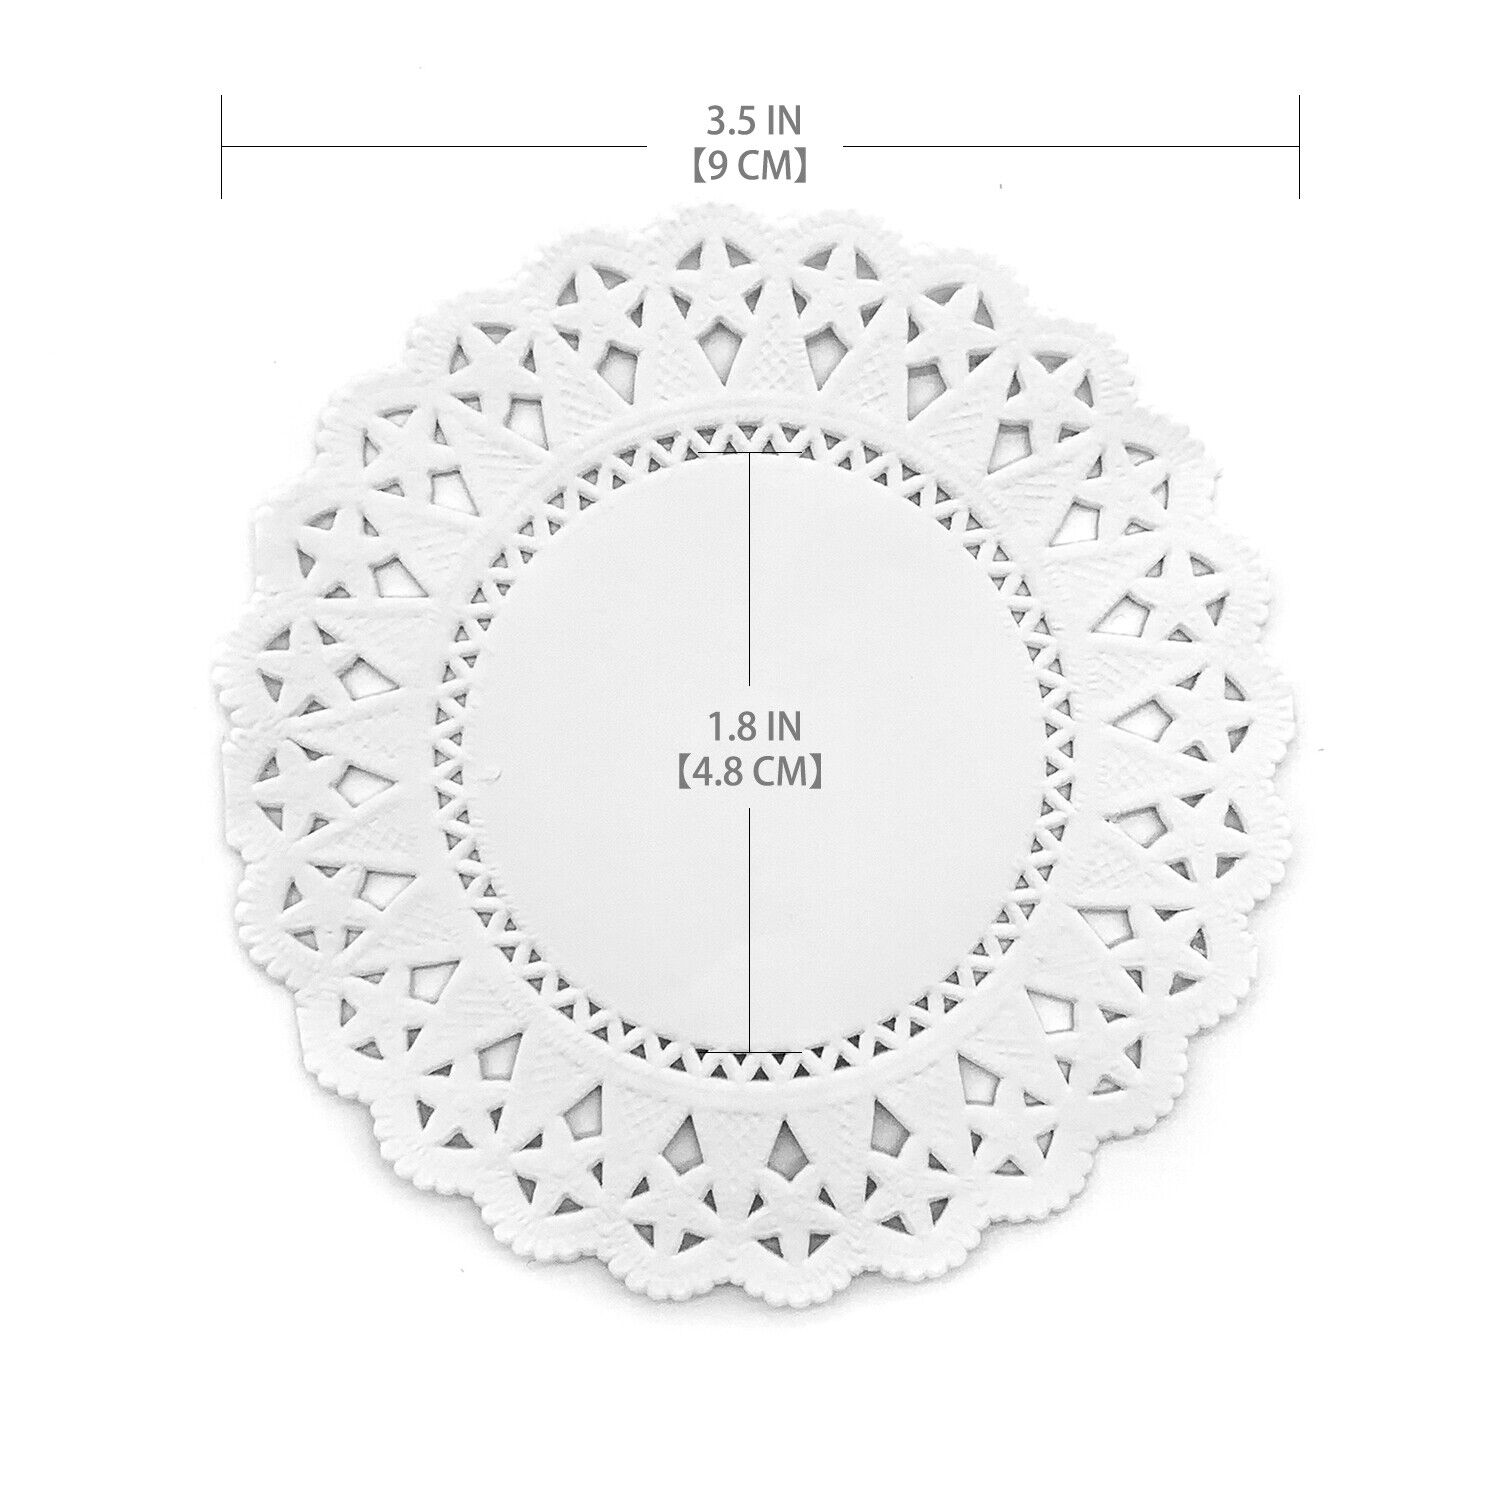 5MLGgoods 250 Pack Paper Doilies, 3.5 to 6.5 In White Lace Round assorted sizes